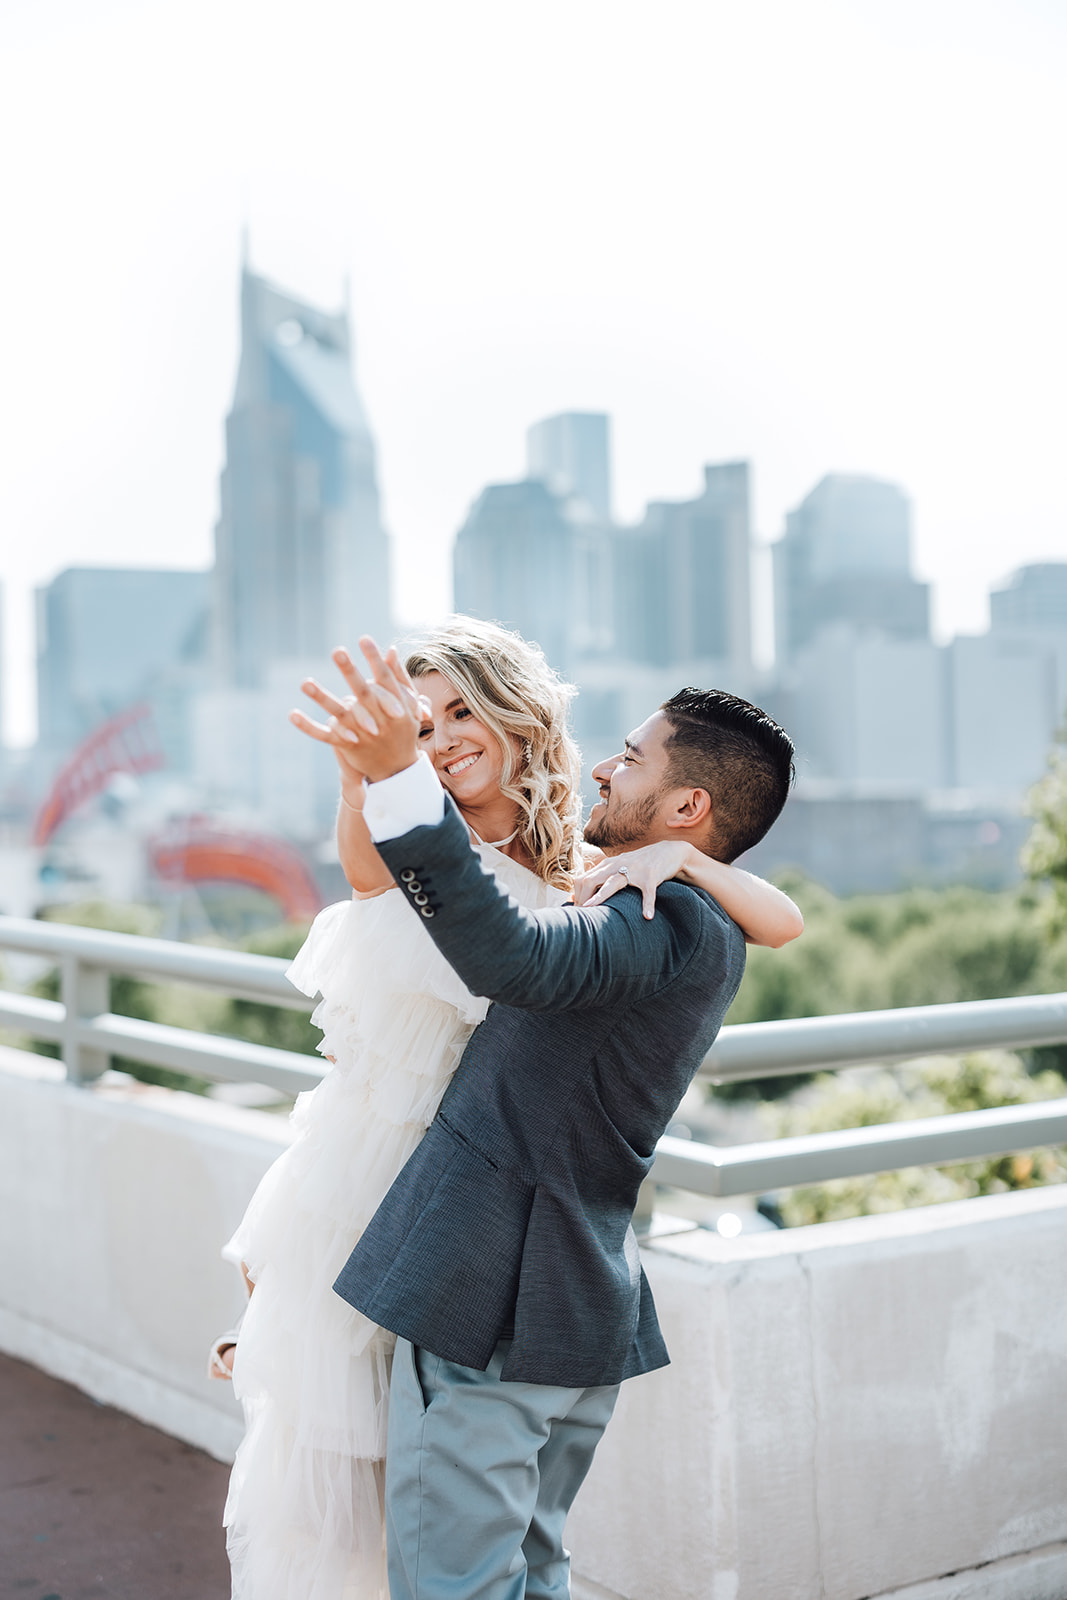 Newlyweds dance together on the roof of a building with downtown in the background at The Bridge Building Nashville